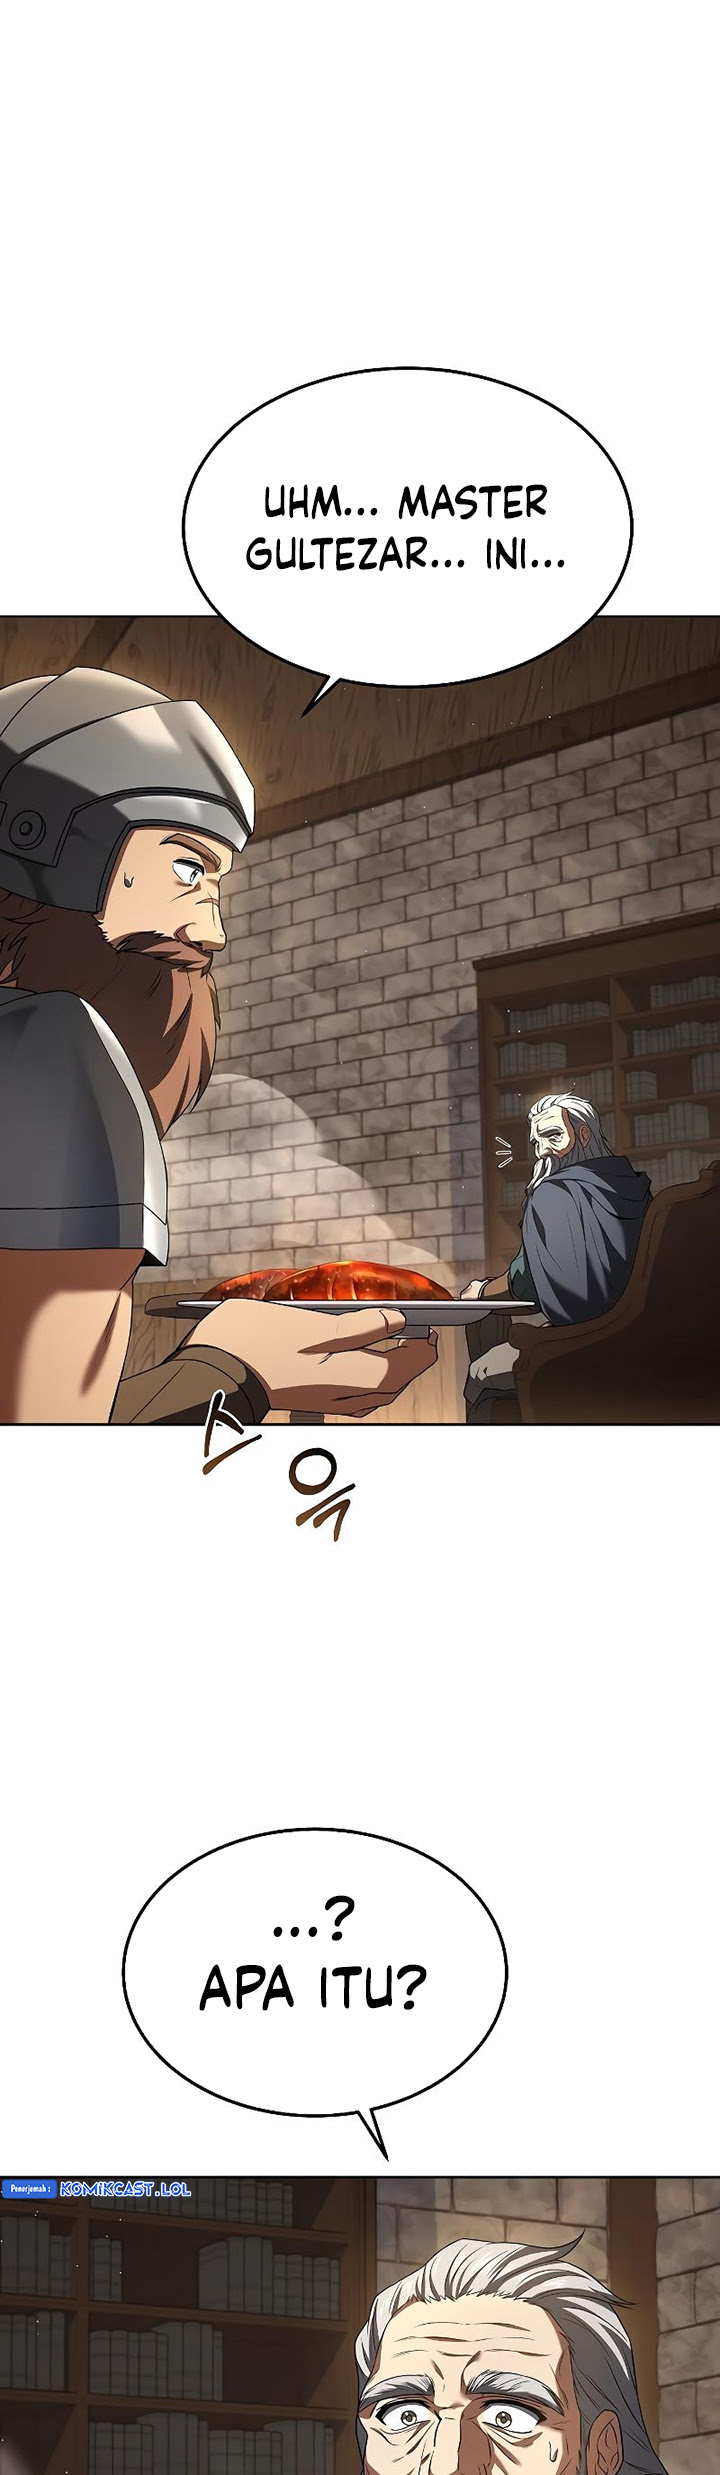 The Archmage’s Restaurant Chapter 20